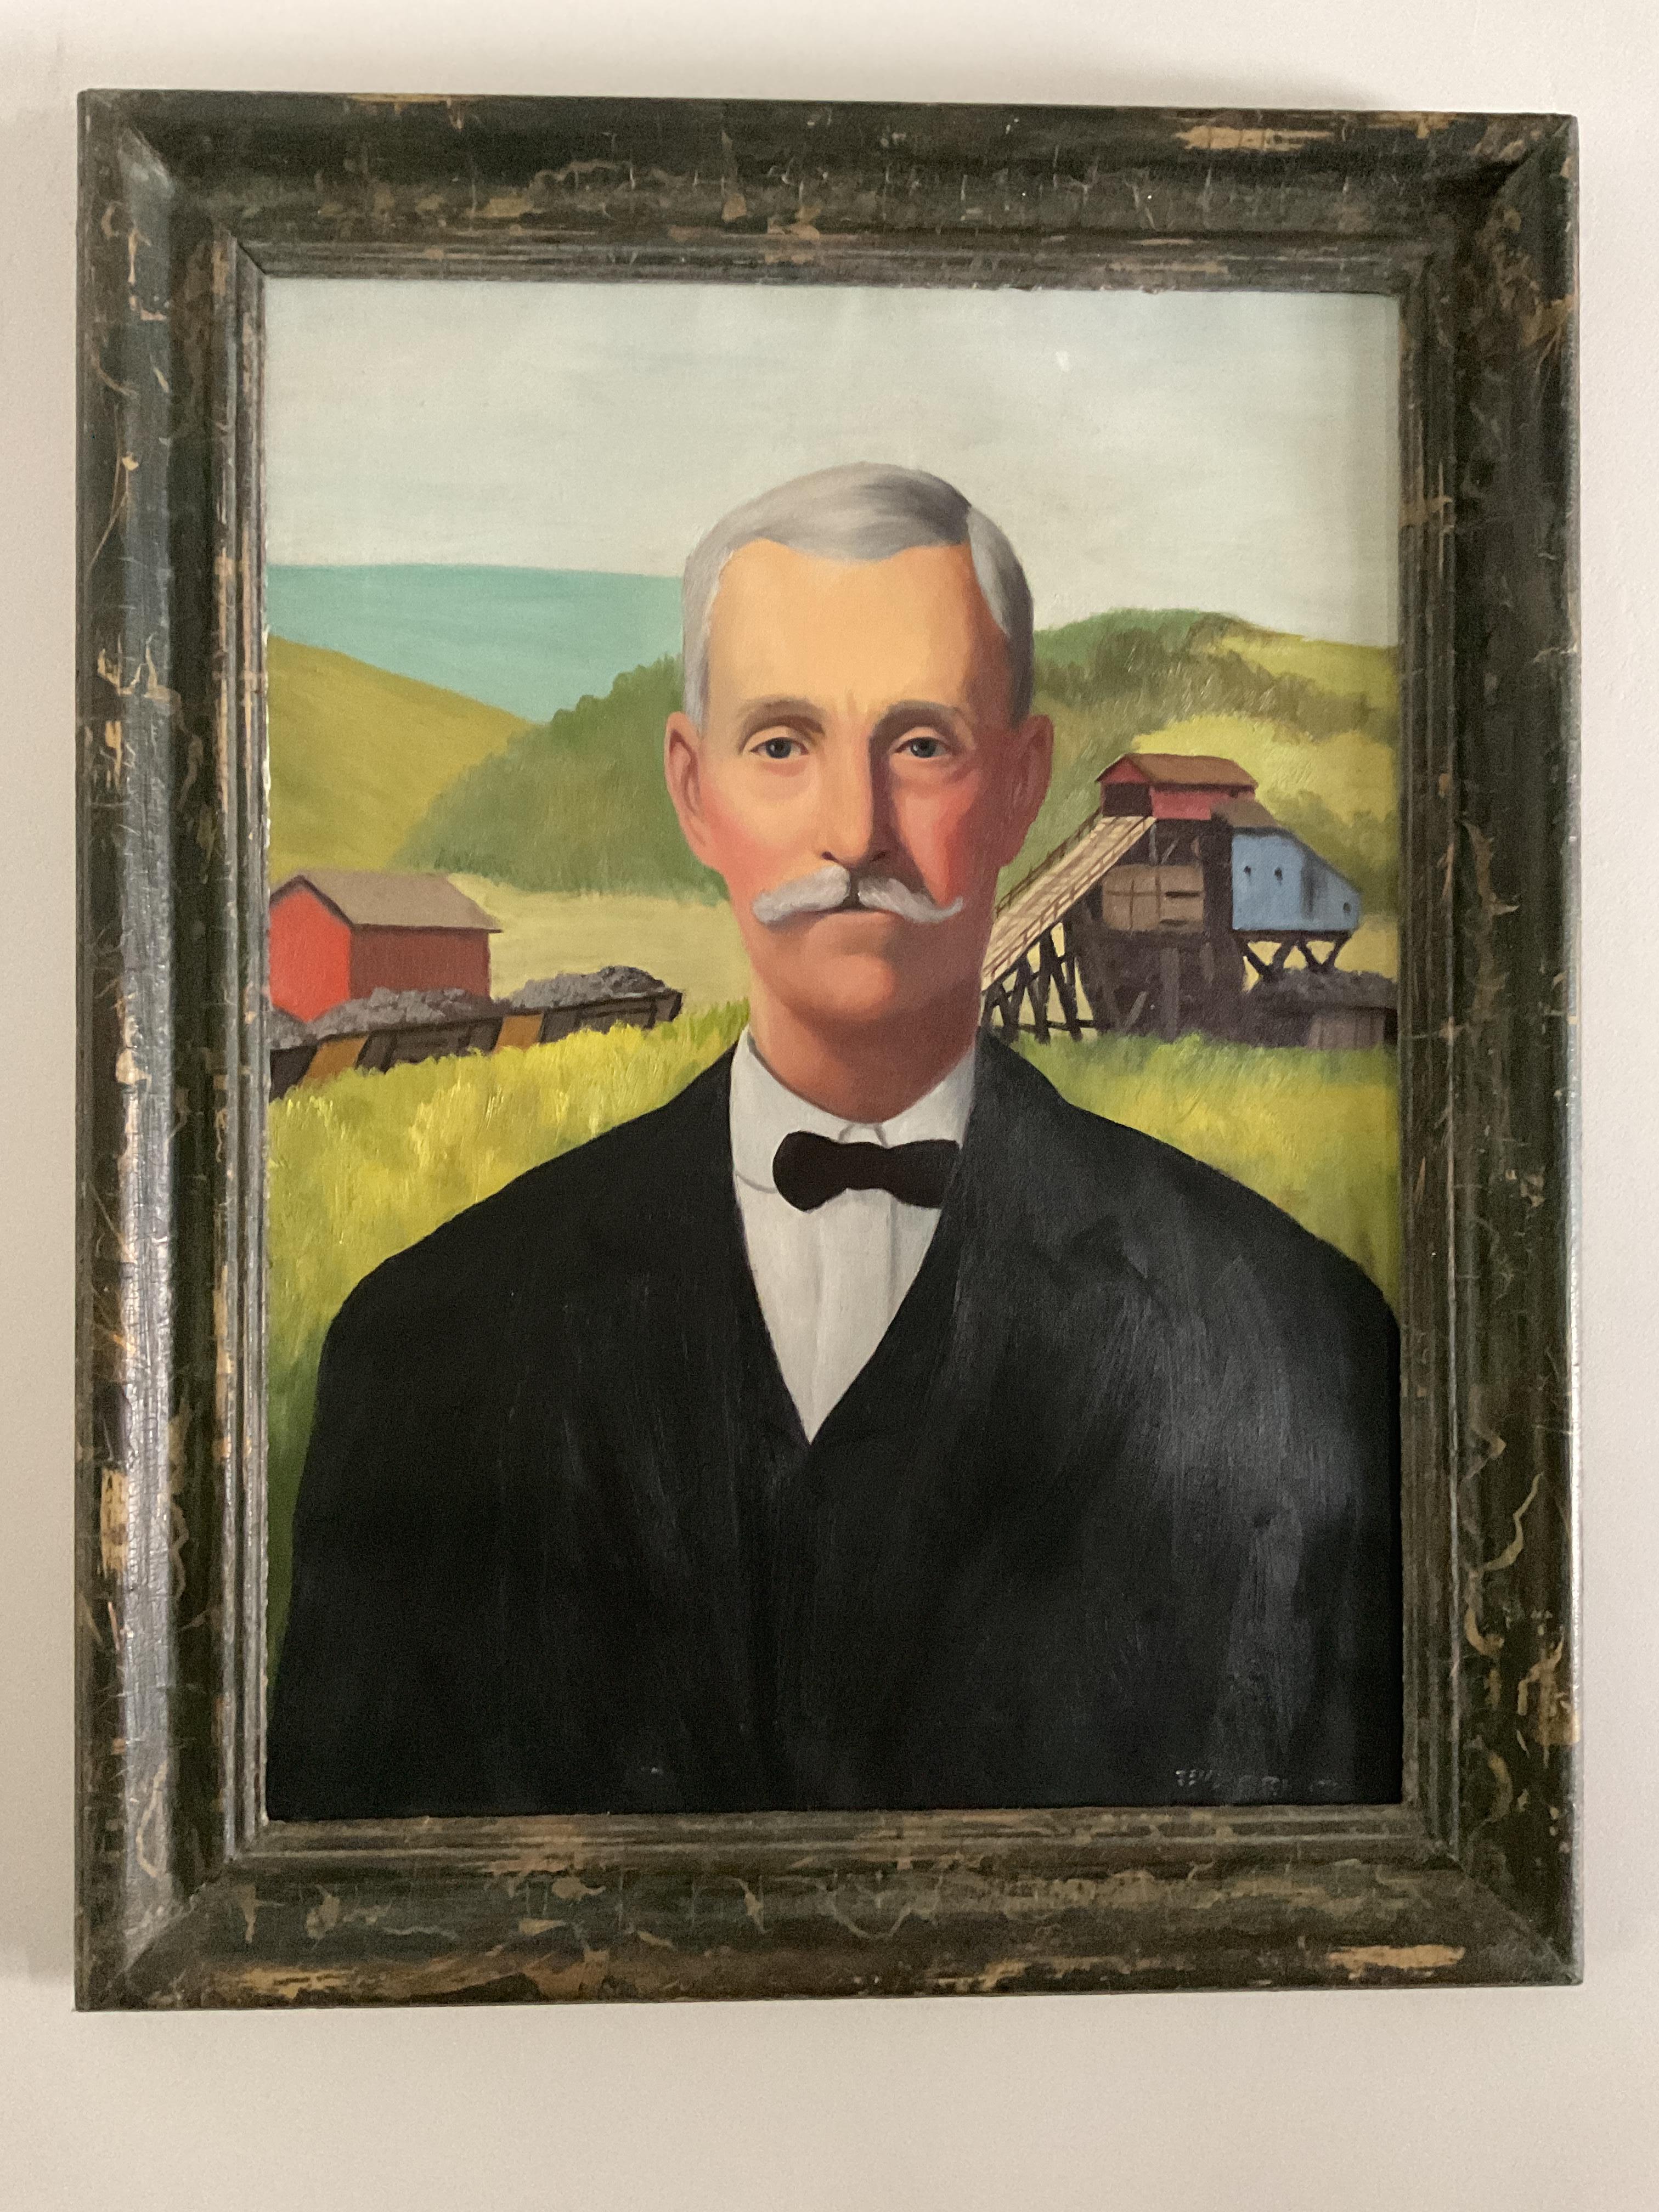 This highly stylized portrait depicts a well dressed man in front of a mining property likely in West Virginia.  It is very much in the manner of earlier American artists such as Grant Wood or a bit of Norman Rockwell. As he is well dressed, he is,